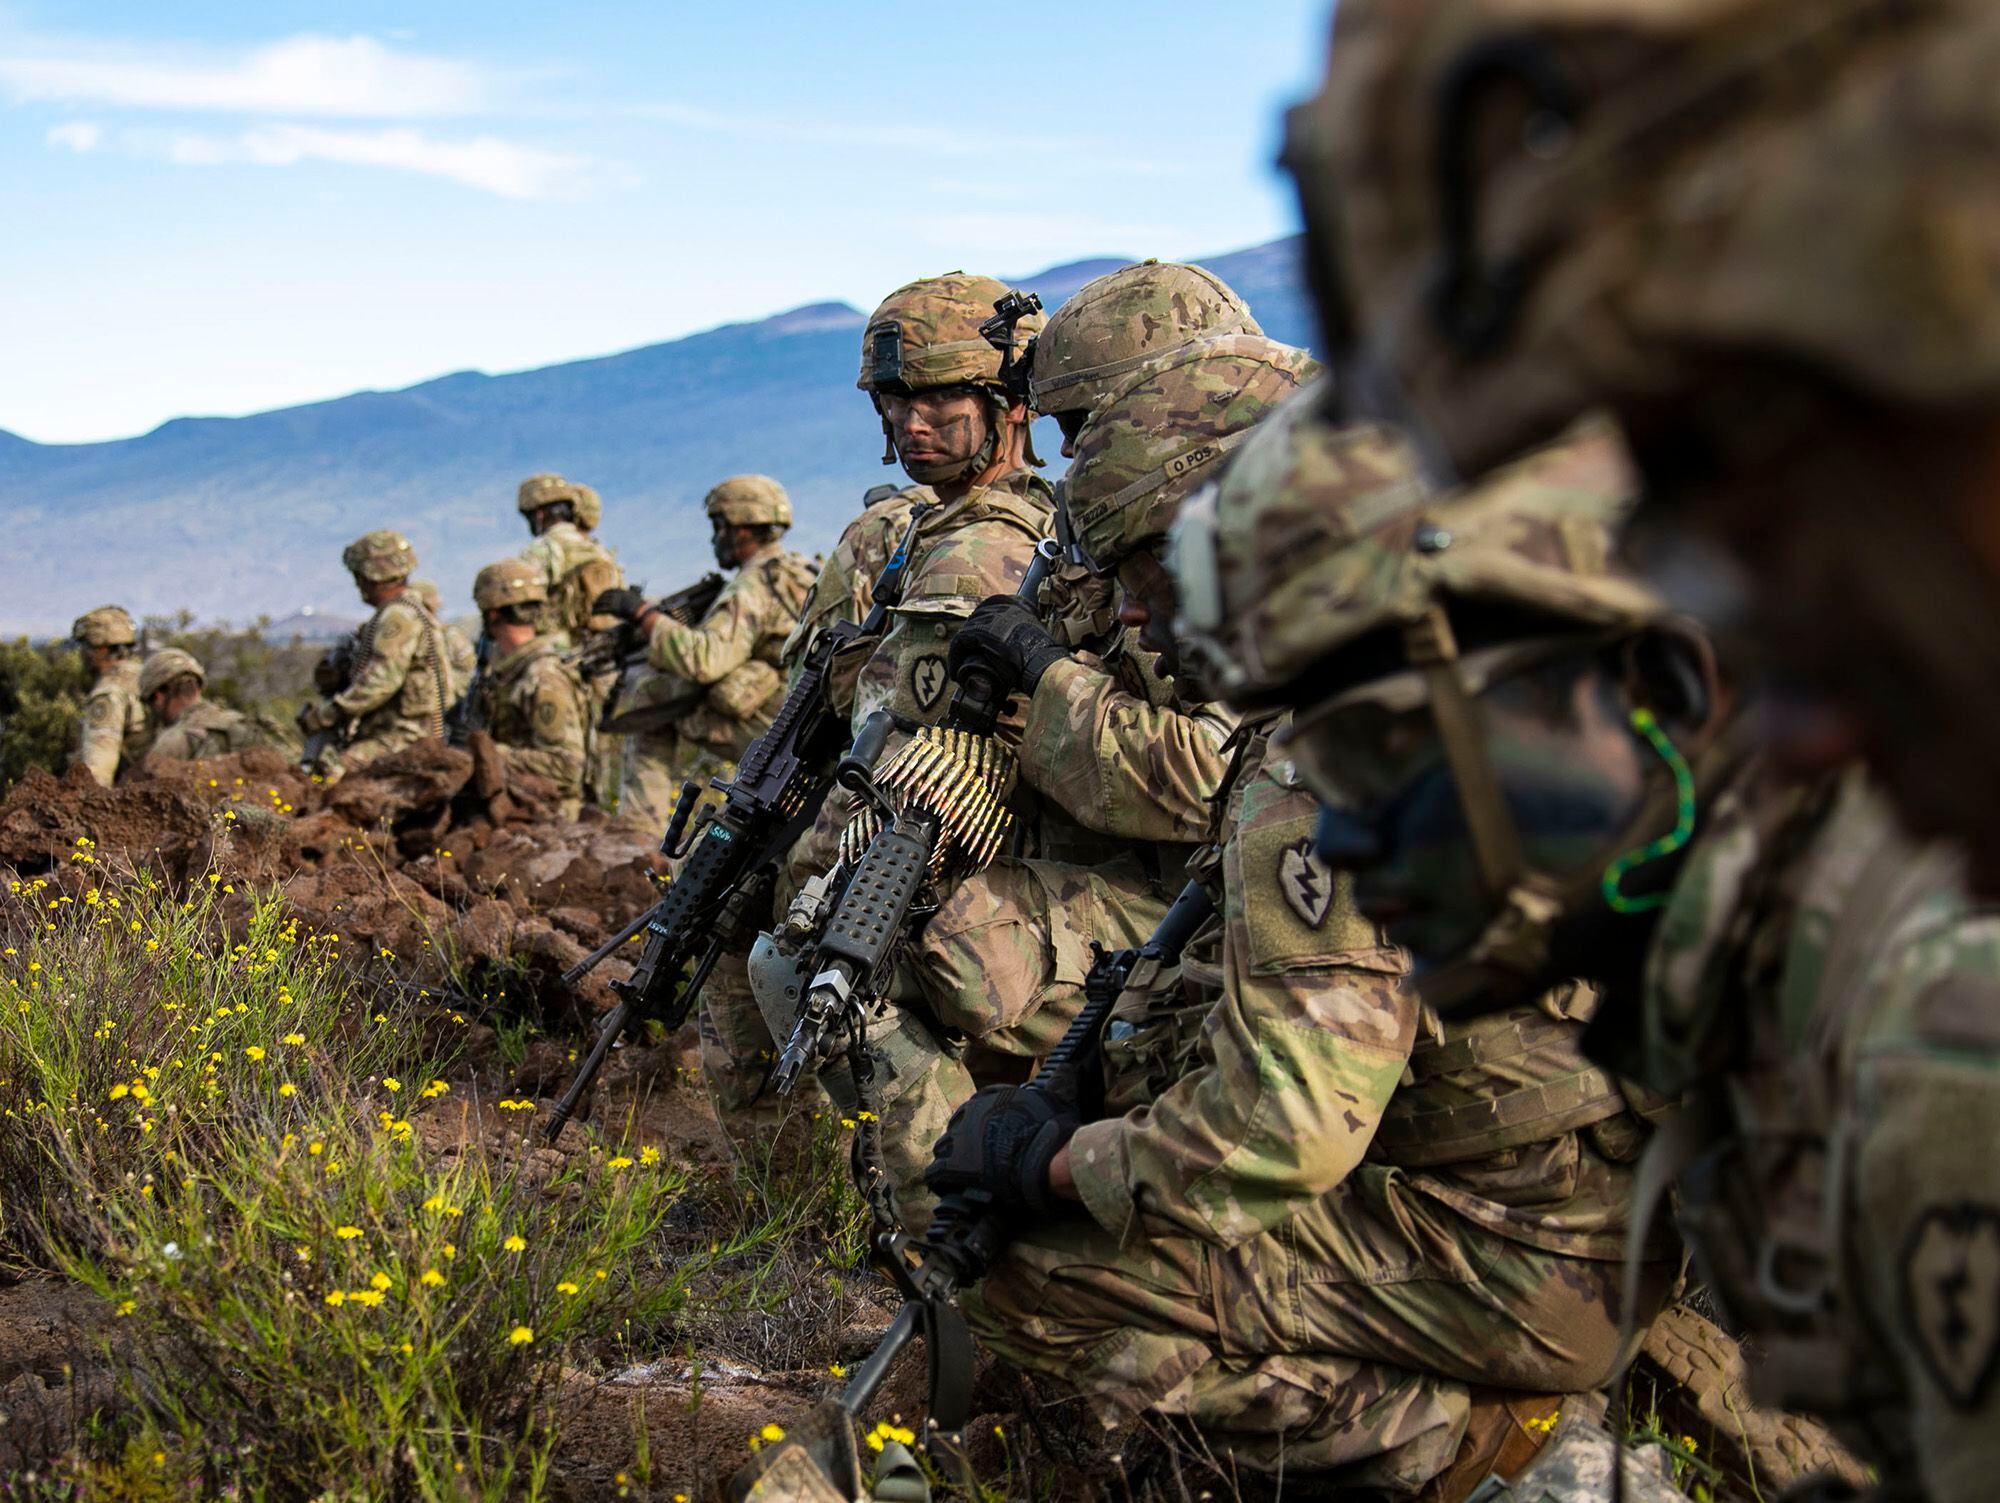 New force generation model aims to regionally align Army units